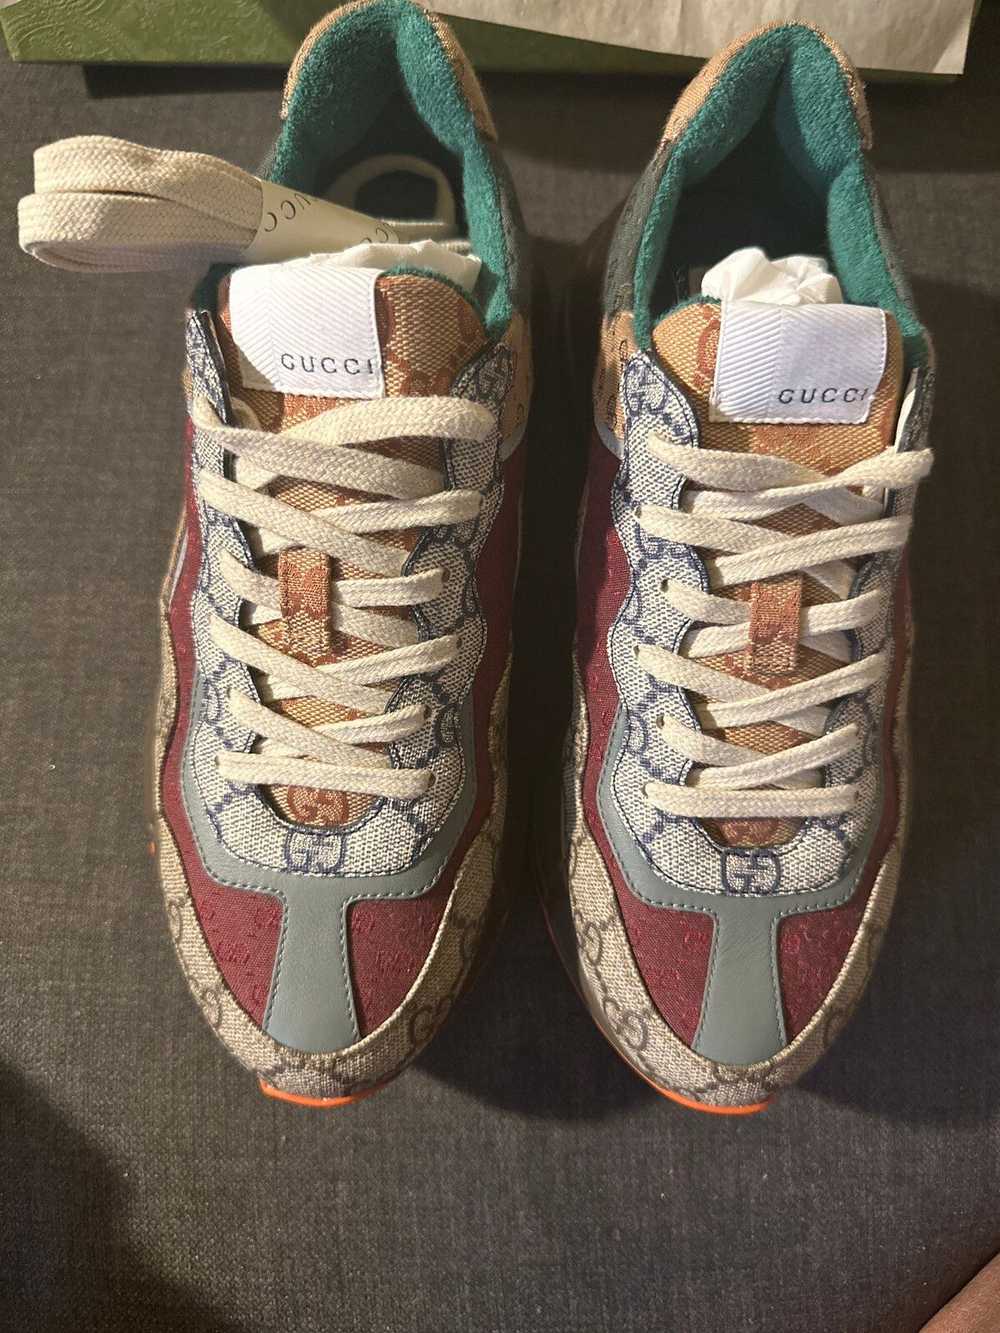 Gucci Gucci Rhython Sneakers - image 4